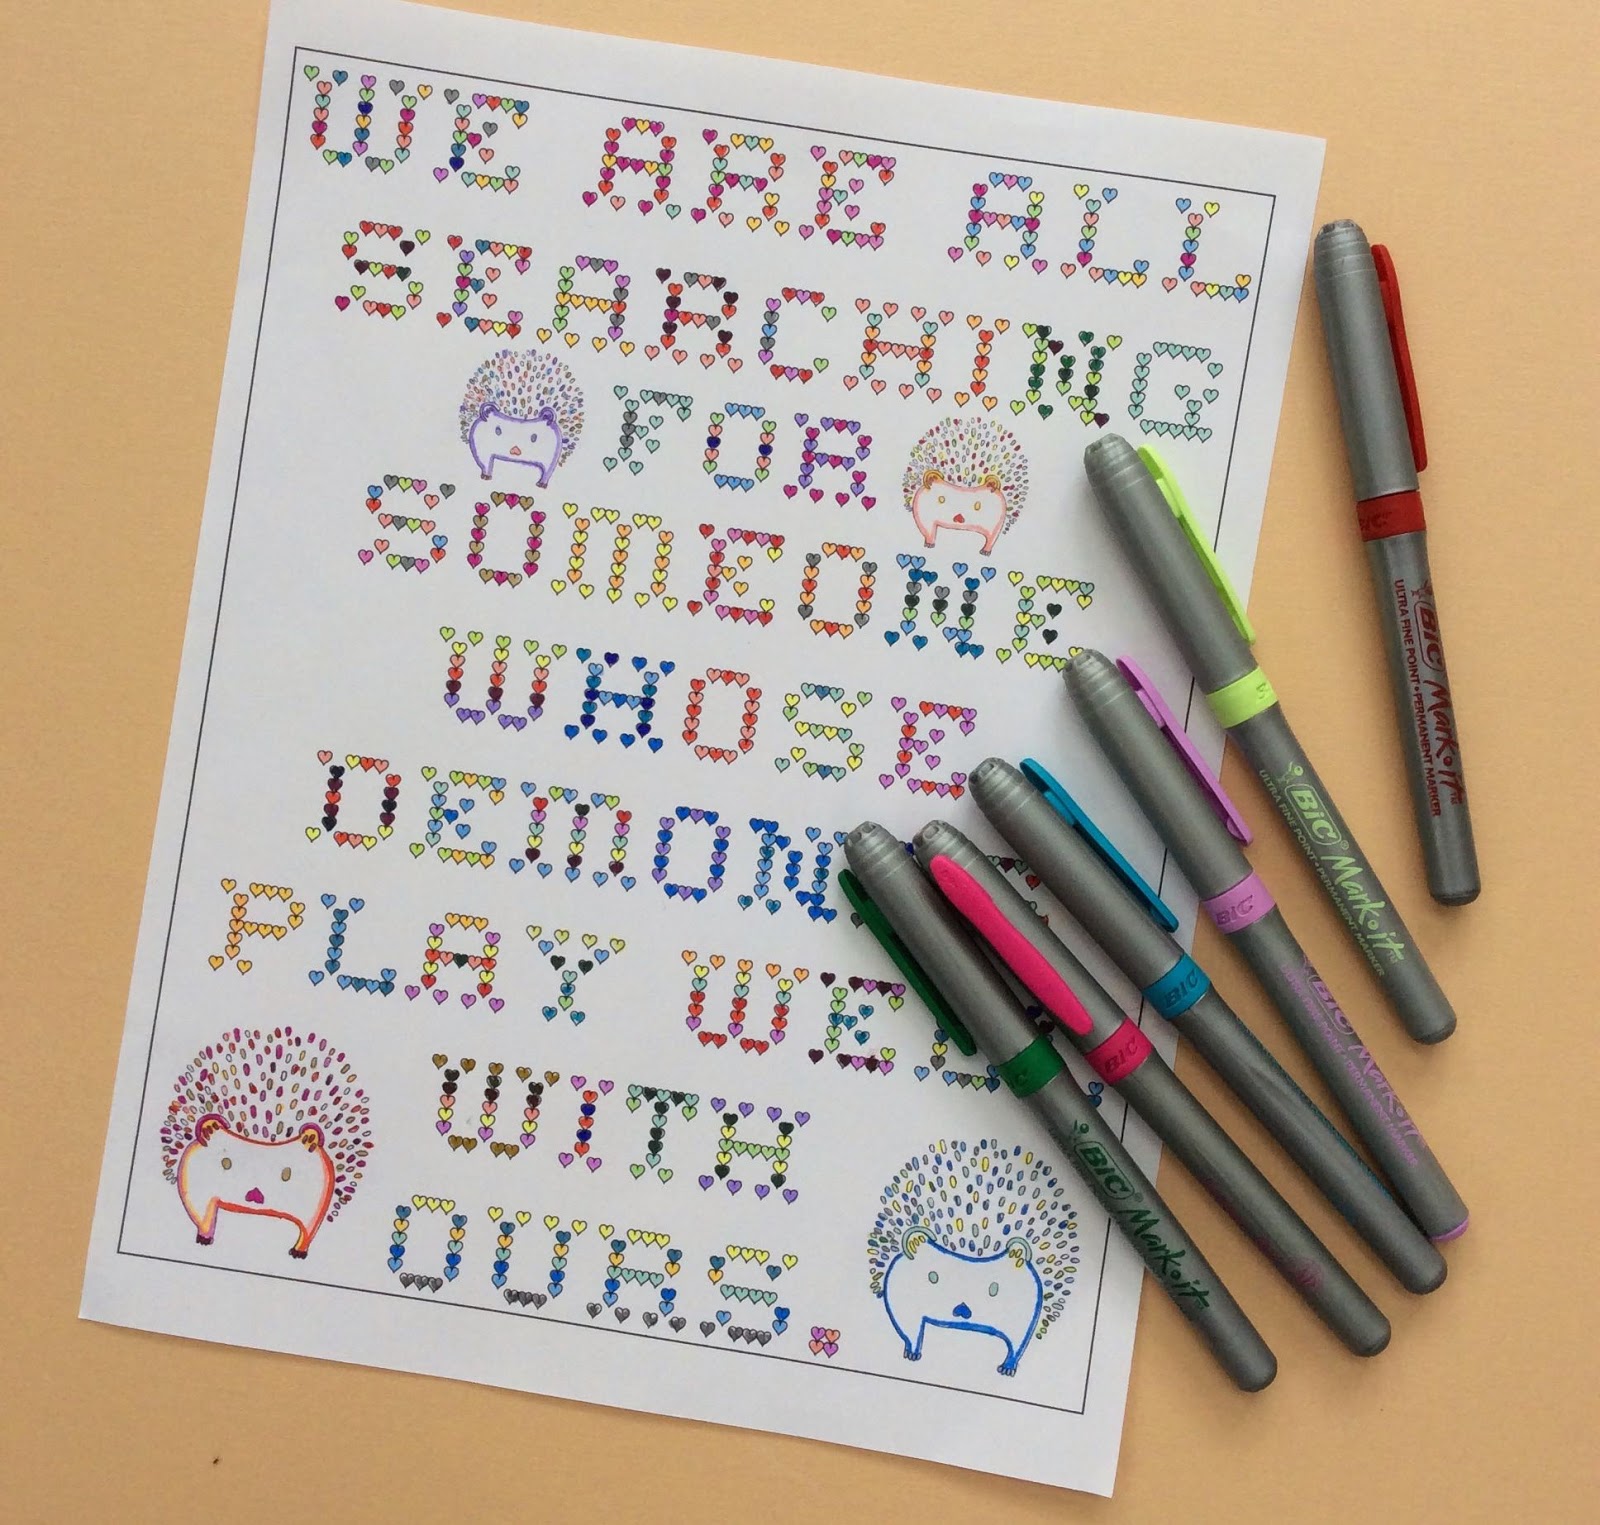 We are all searching for someone whose demons play well with ours, adult coloring page, quote, stefanie girard